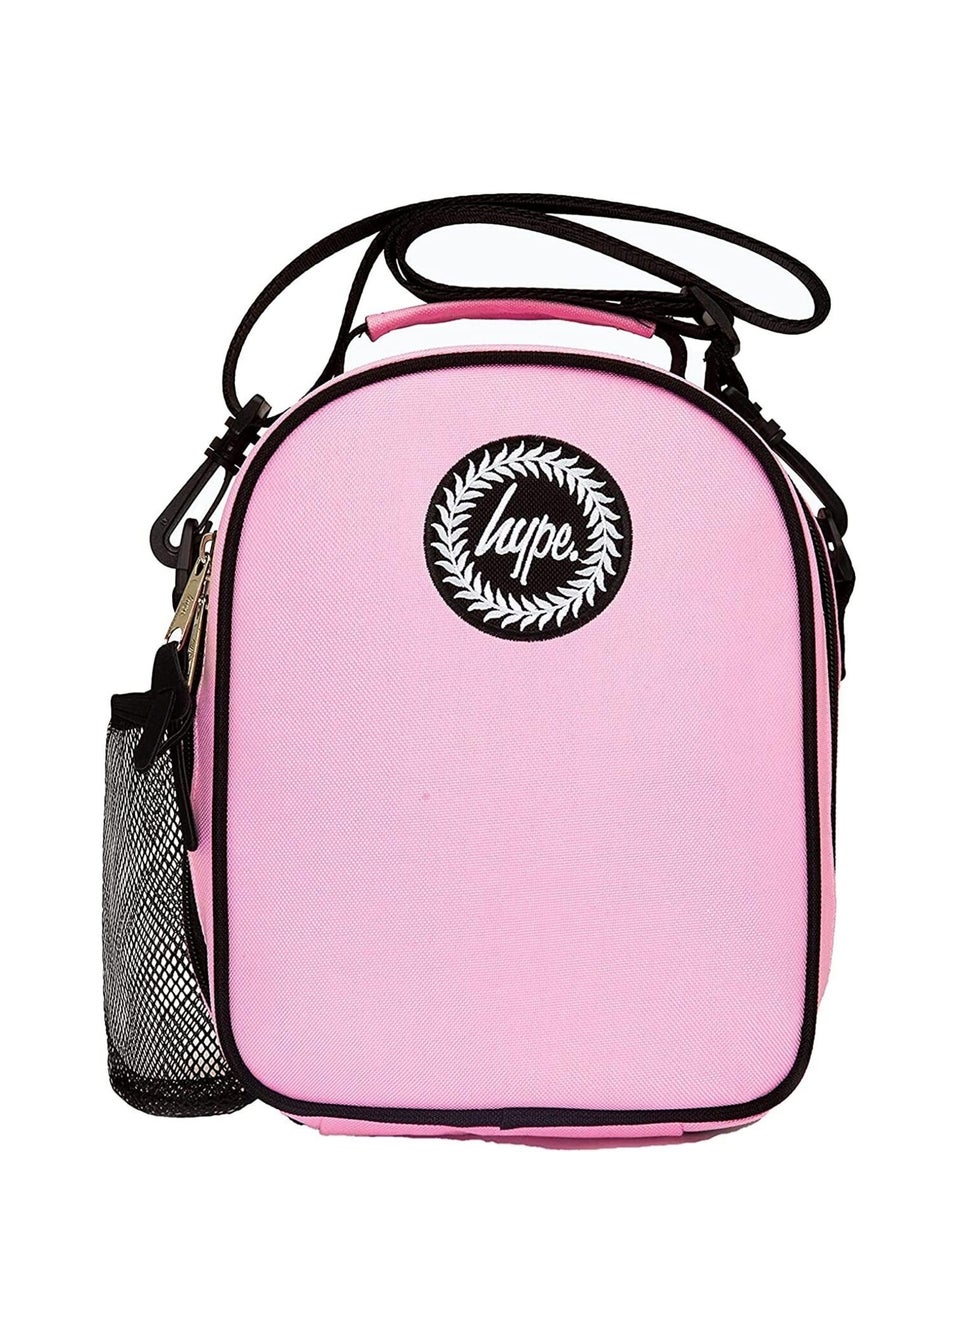 Hype Pink Maxi Lunch Bag